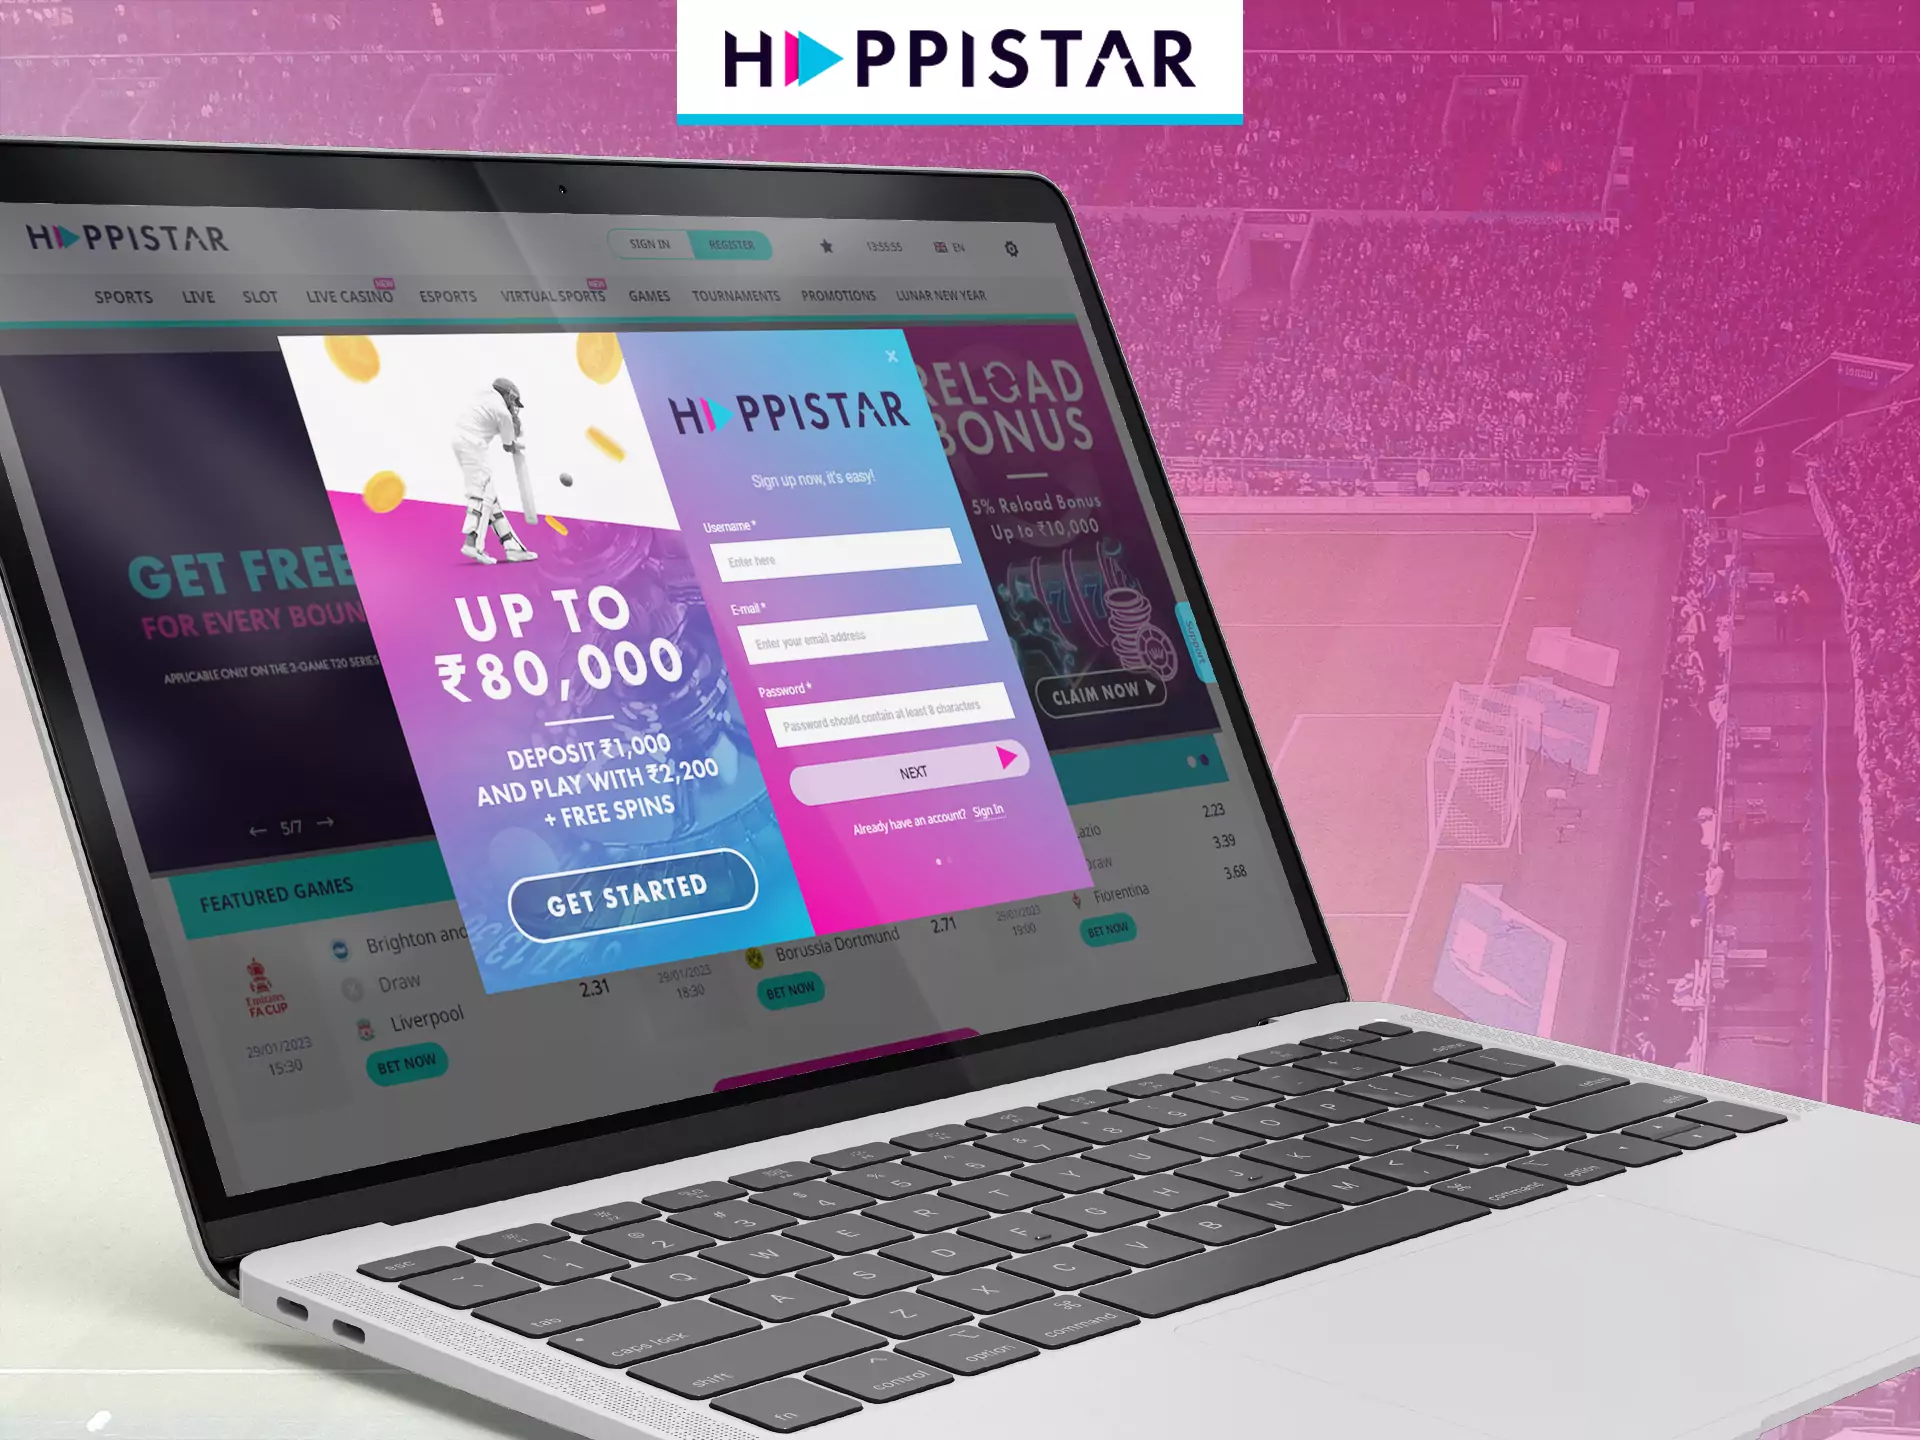 Create an account on Happistar if you want to join.